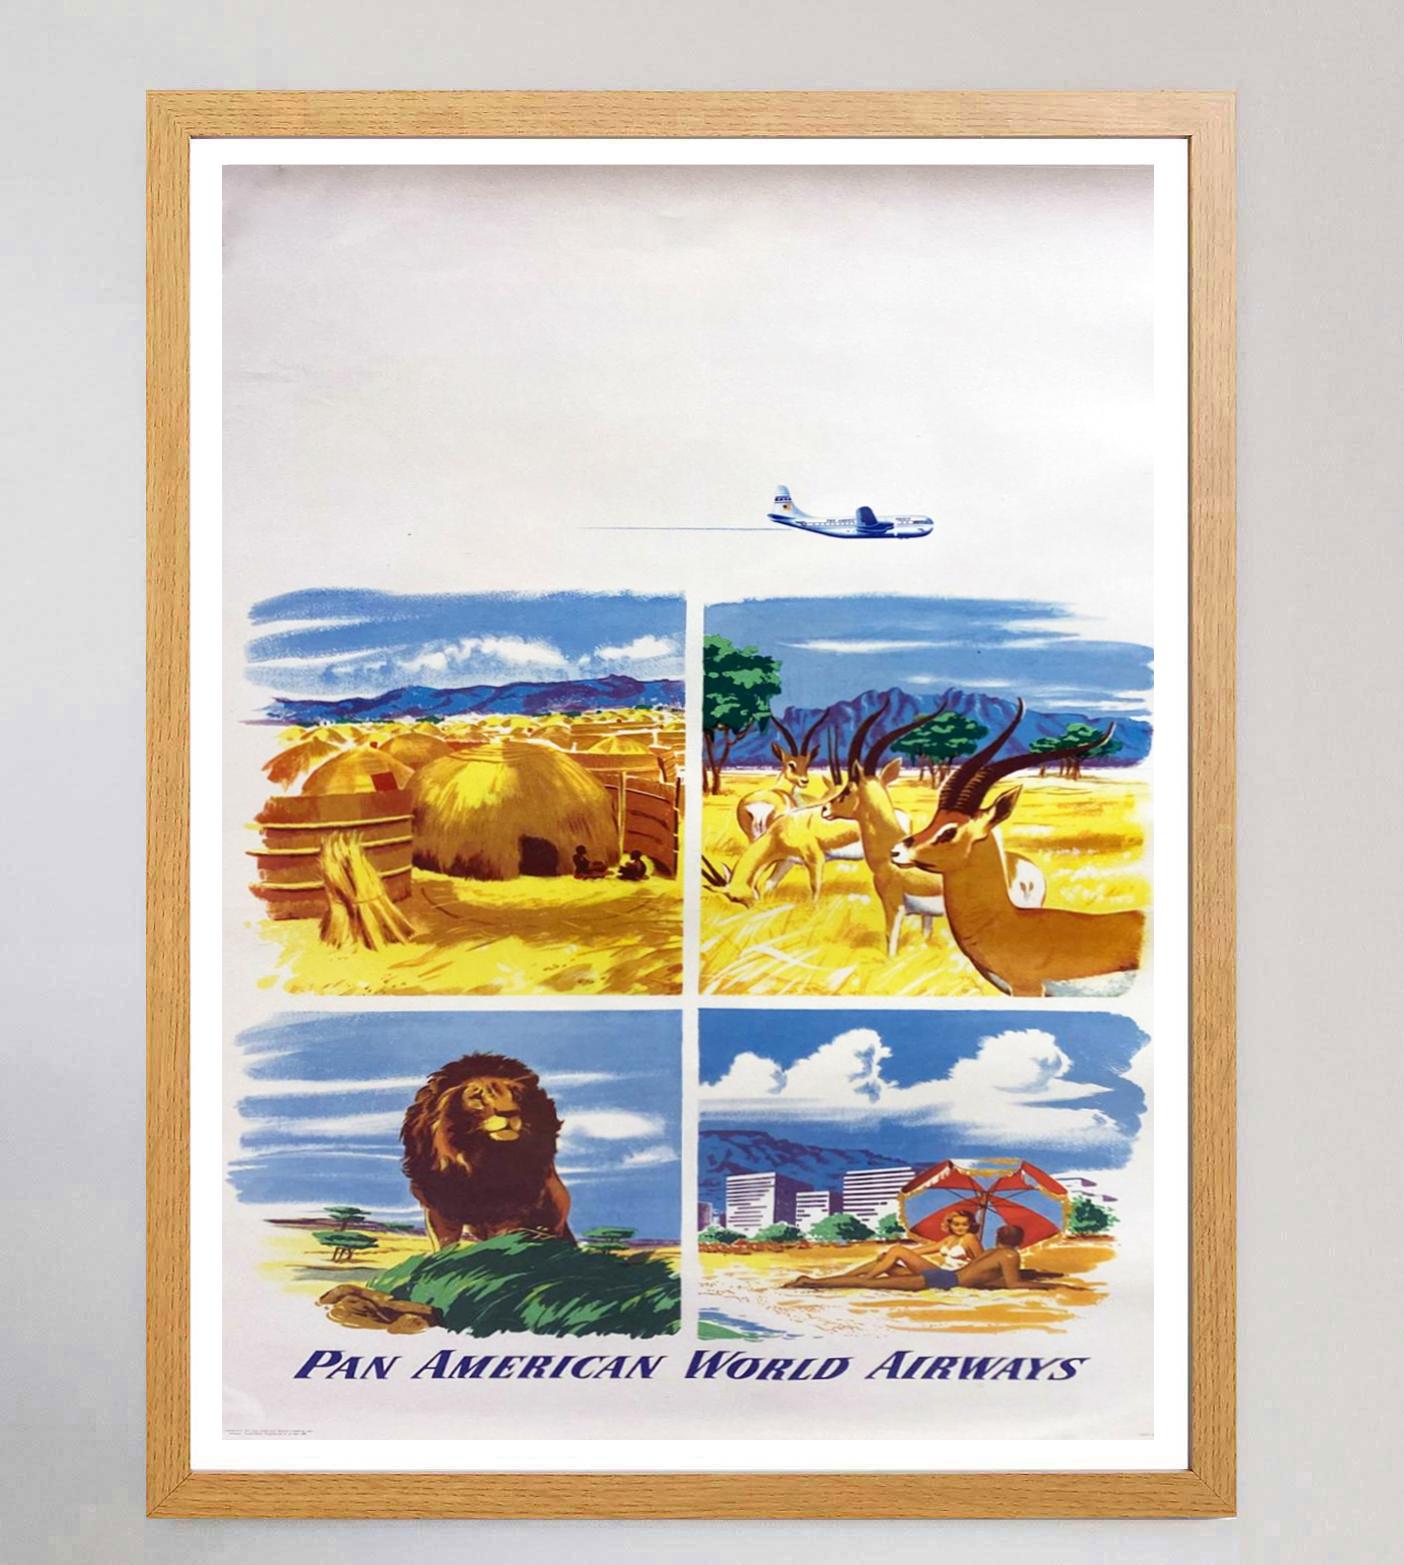 1951 Pan American World Airways Original Vintage Poster In Good Condition For Sale In Winchester, GB